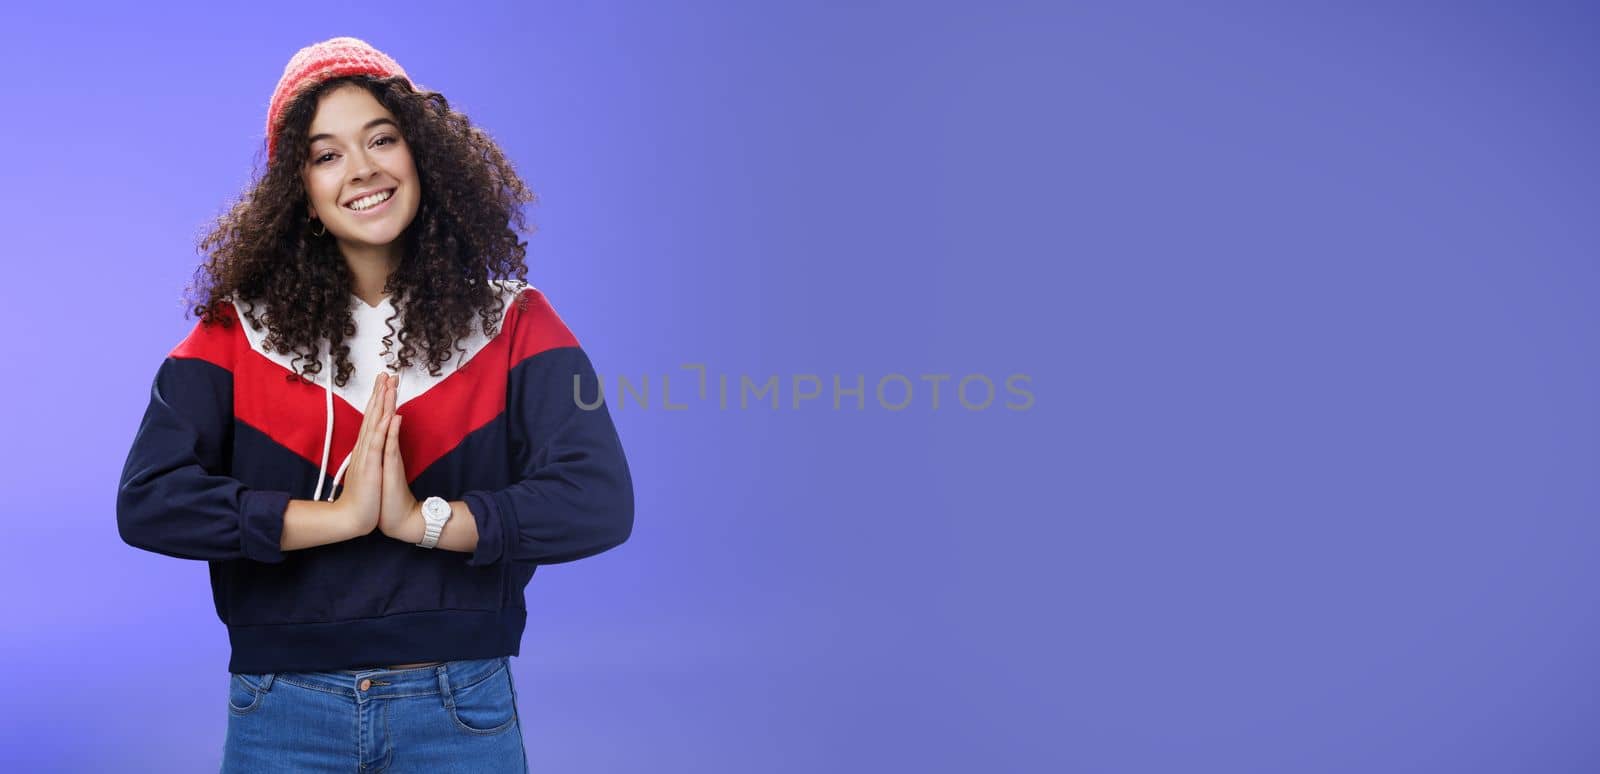 Portrait of charming curly-haired feminine girlfriend begging for favour as posing over blue background in winter outfit with hat, holding hands in pray smiling with angel look and friendly gaze. Body language and facial expressions concept